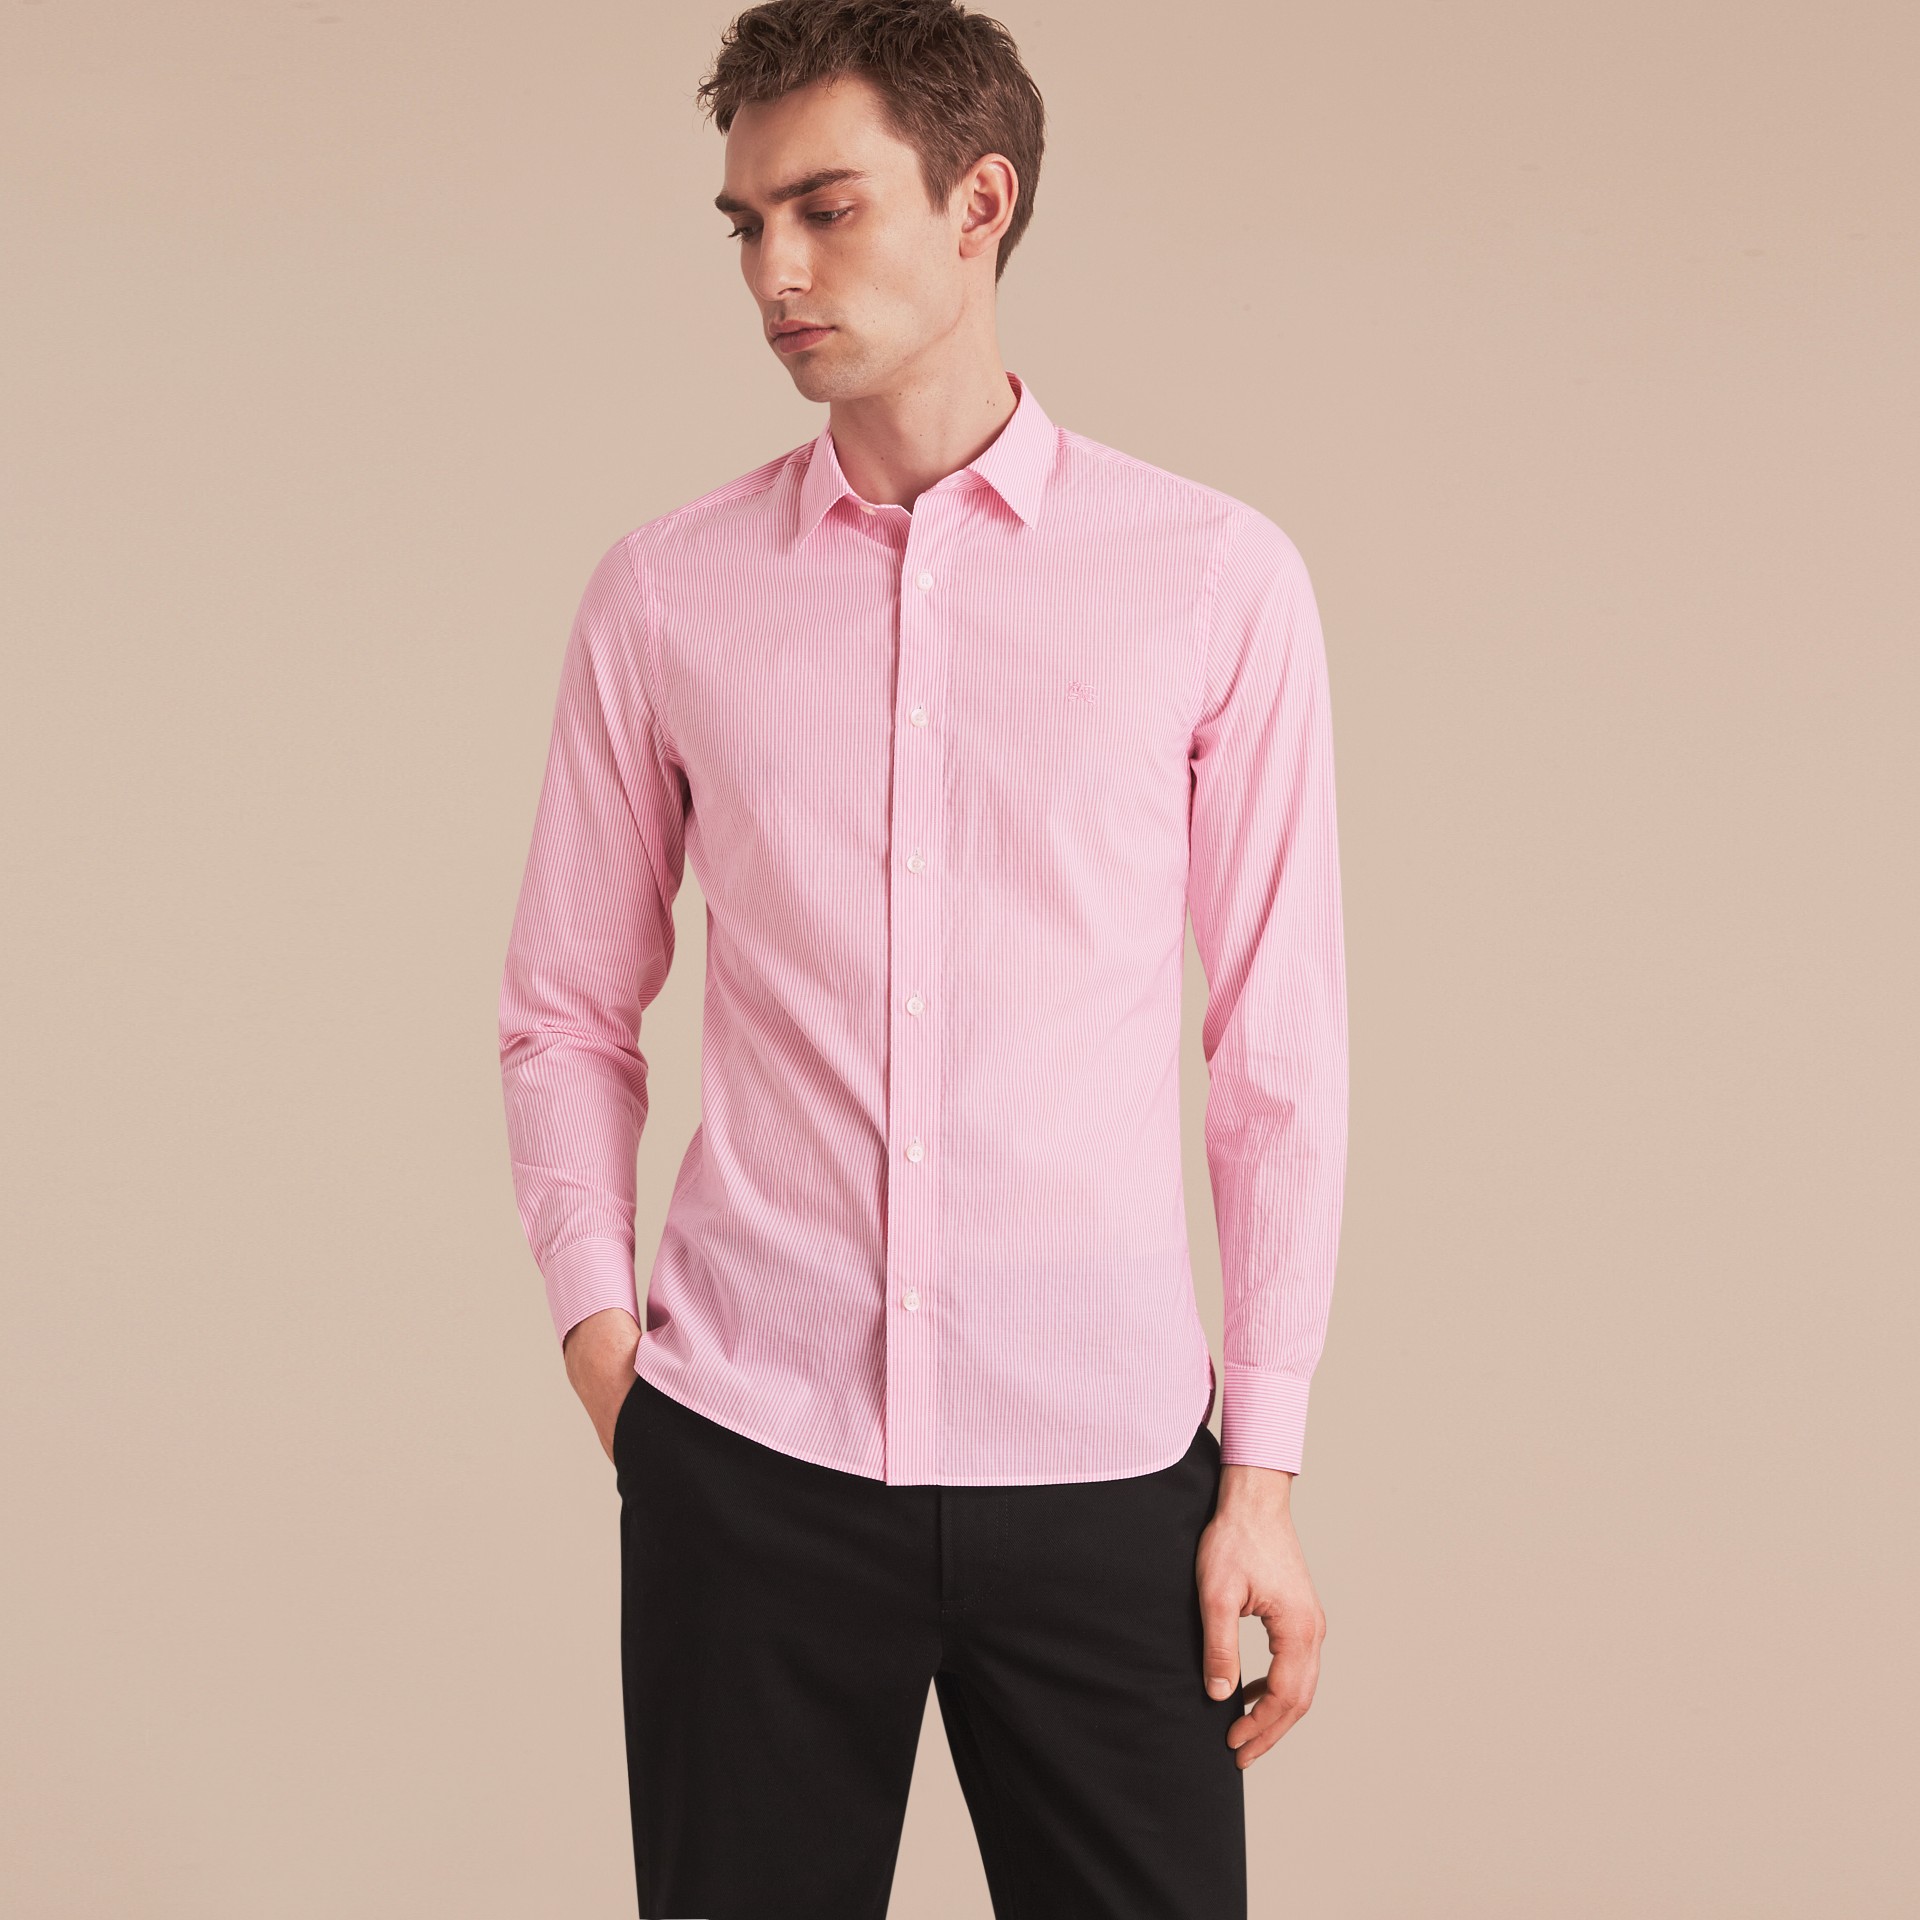 Striped Cotton Blend Shirt in Pale Pink - Men | Burberry Canada